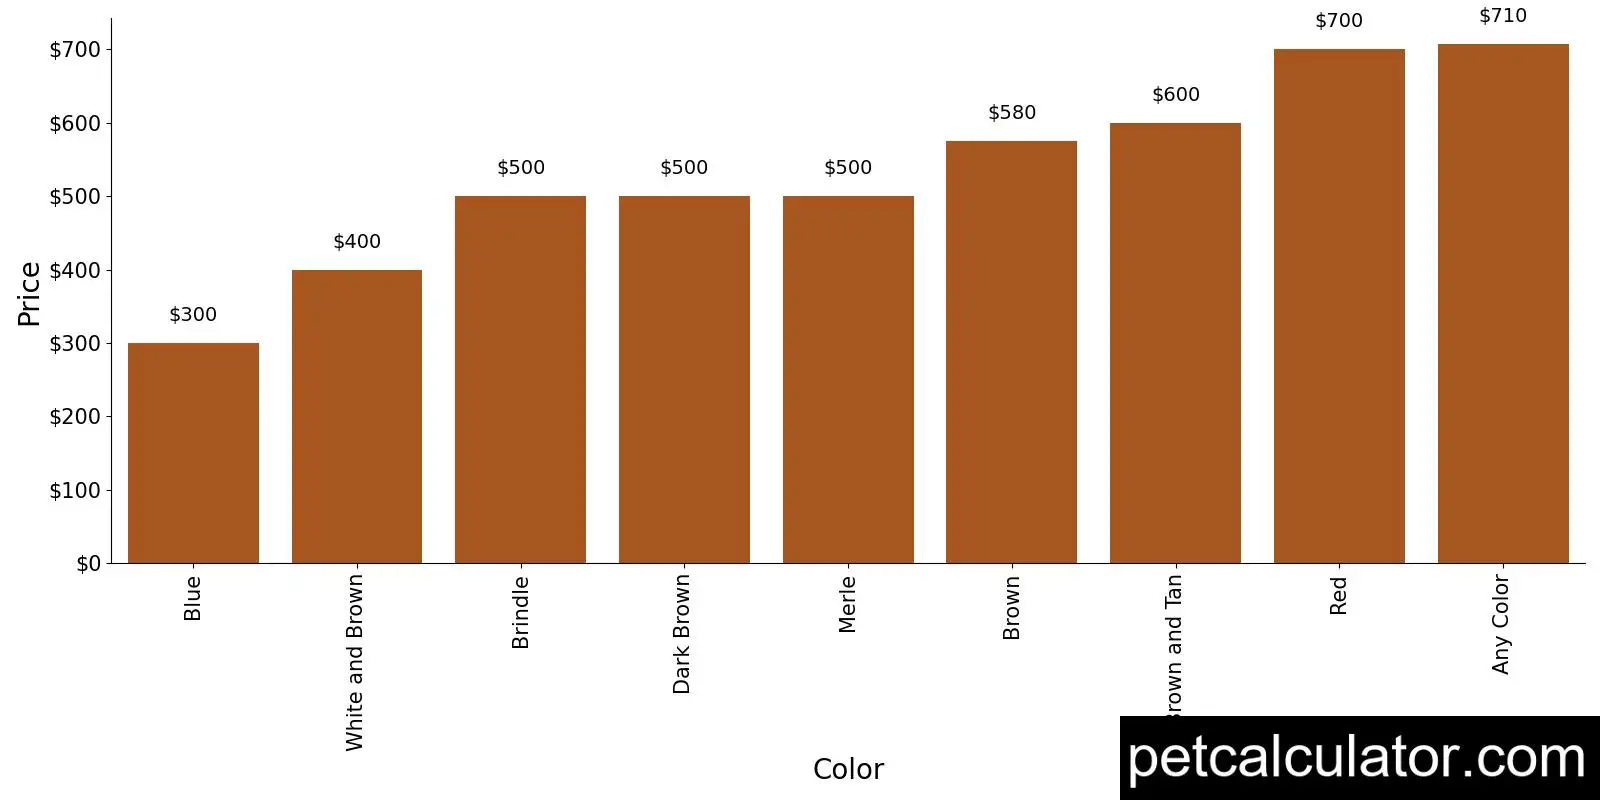 Price of Catahoula Bulldog by Color 